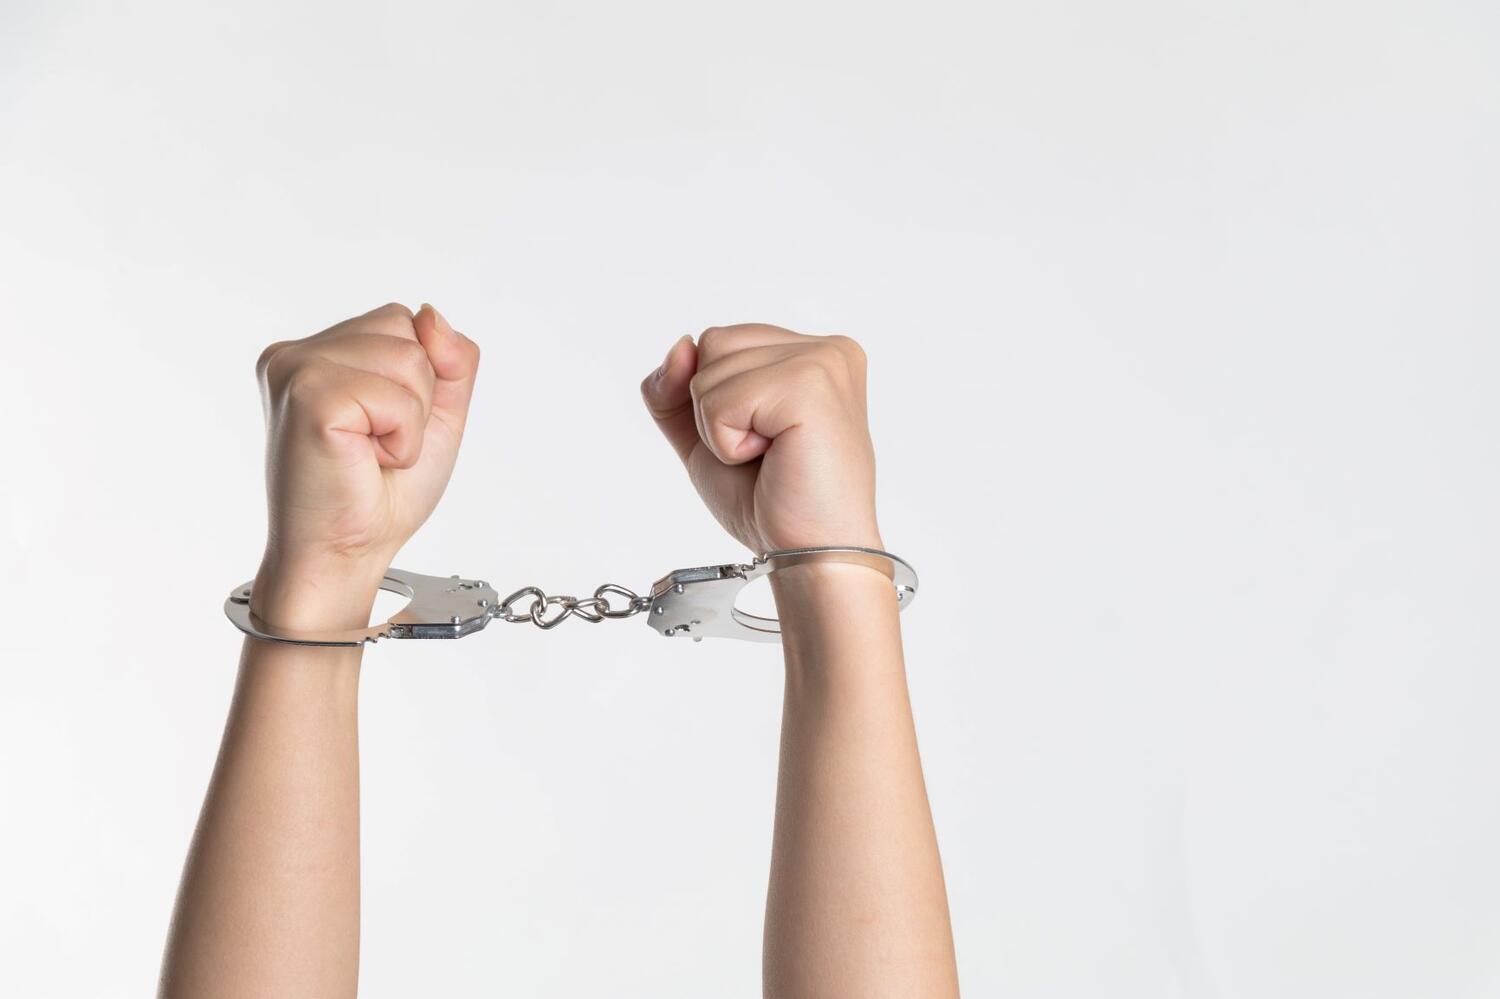  Golden Handcuffs: What Employee Survey Responses Reveal About Burnout